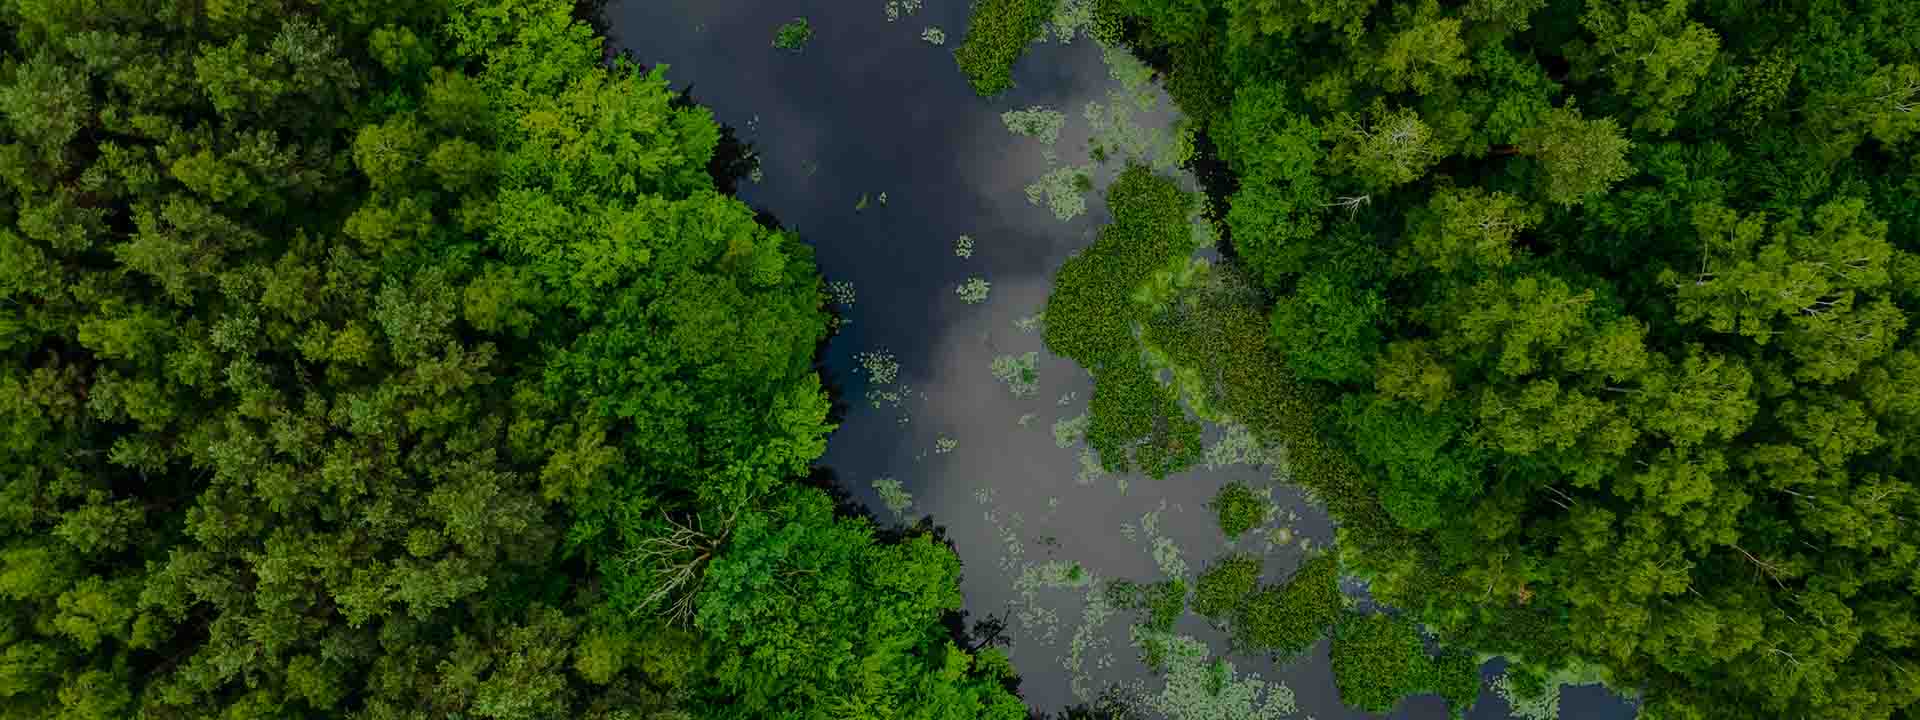 Aerial photo of river running through forest with algae growing